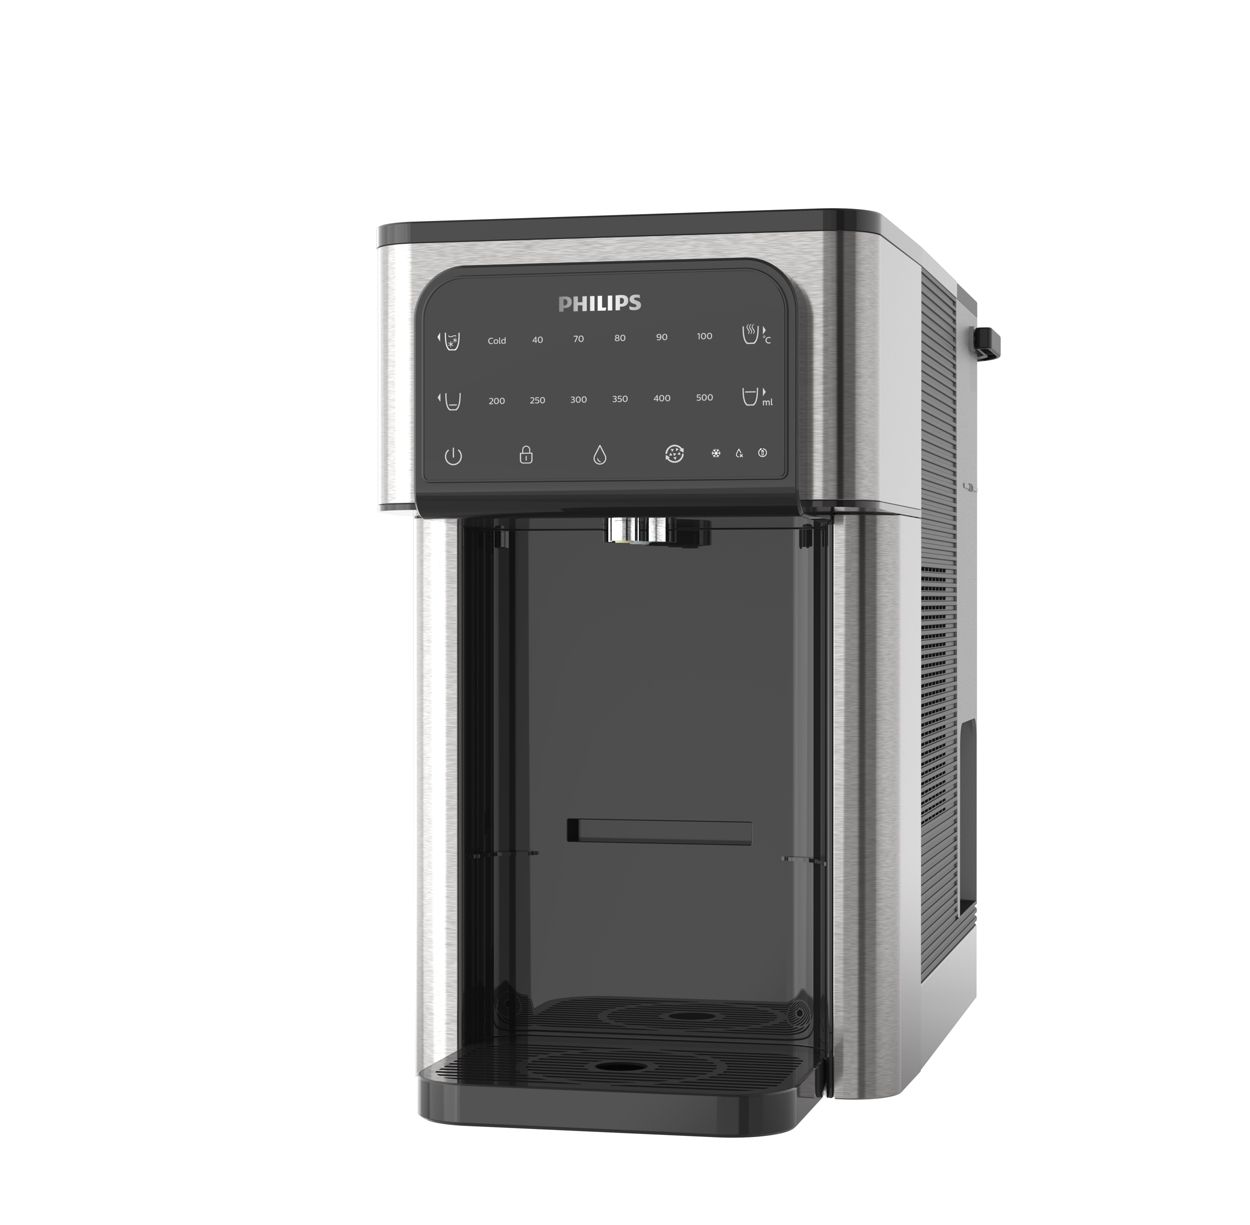 Introducing Philips Reverse Osmosis Water Station, Hot & Cold